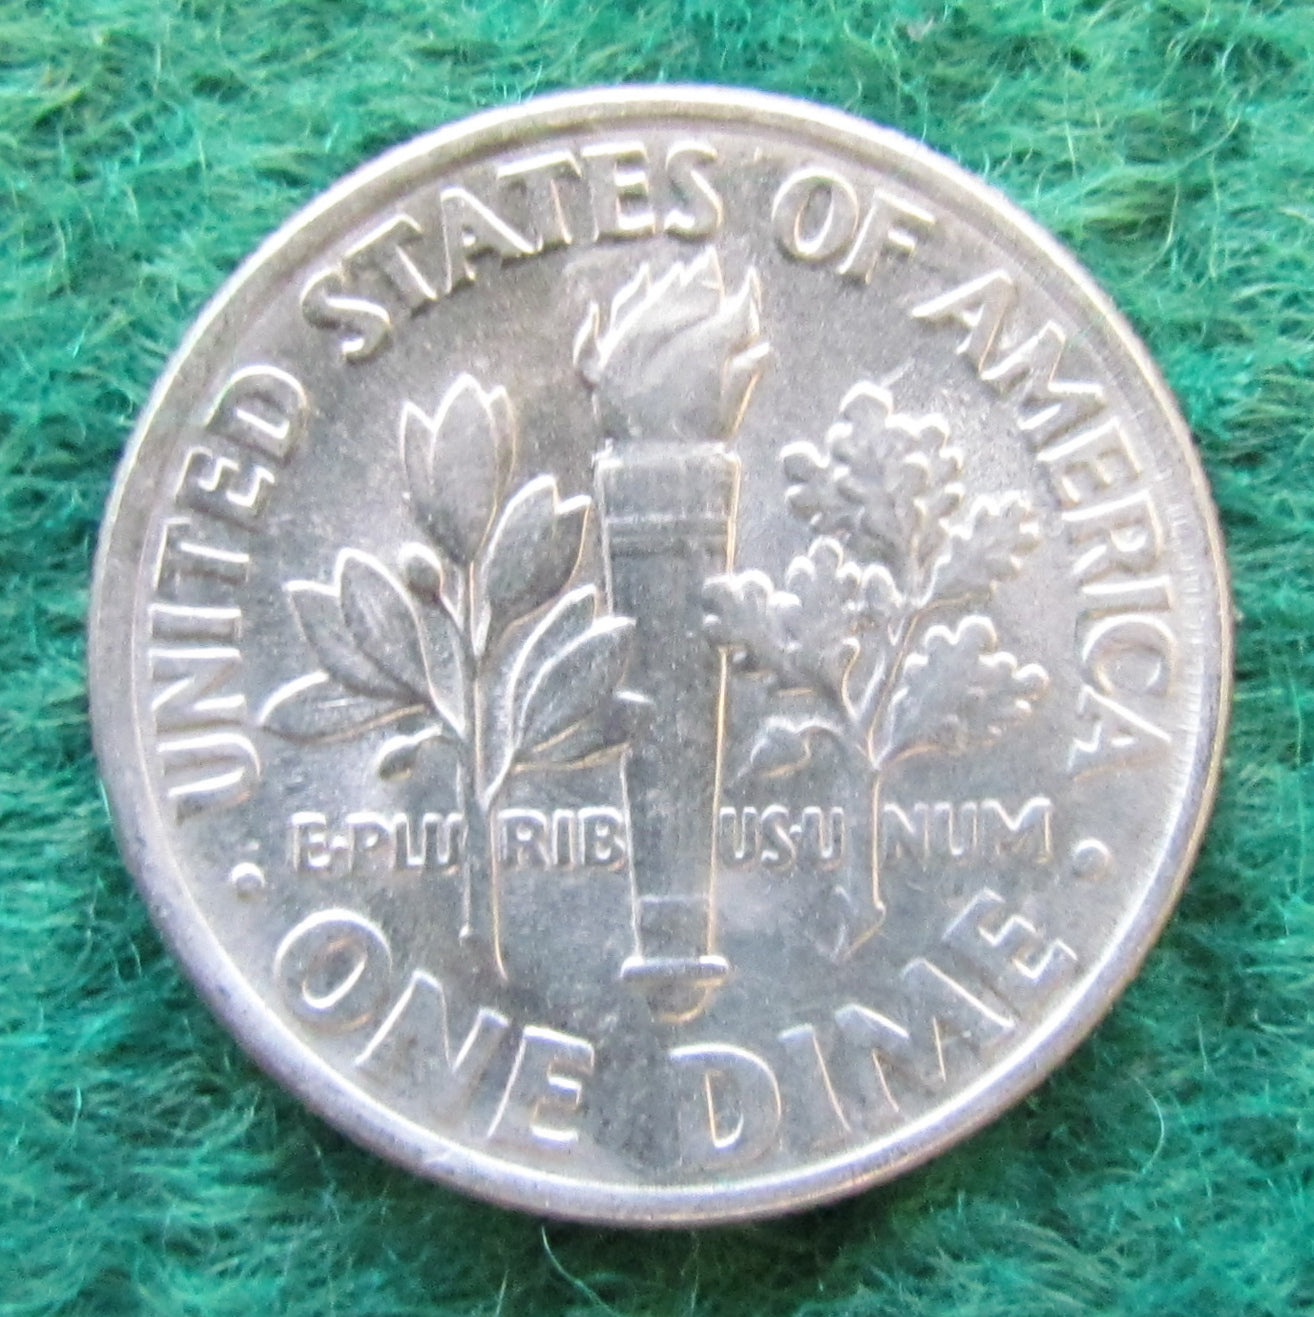 USA American 1992 D Dime Roosevelt Coin - Circulated